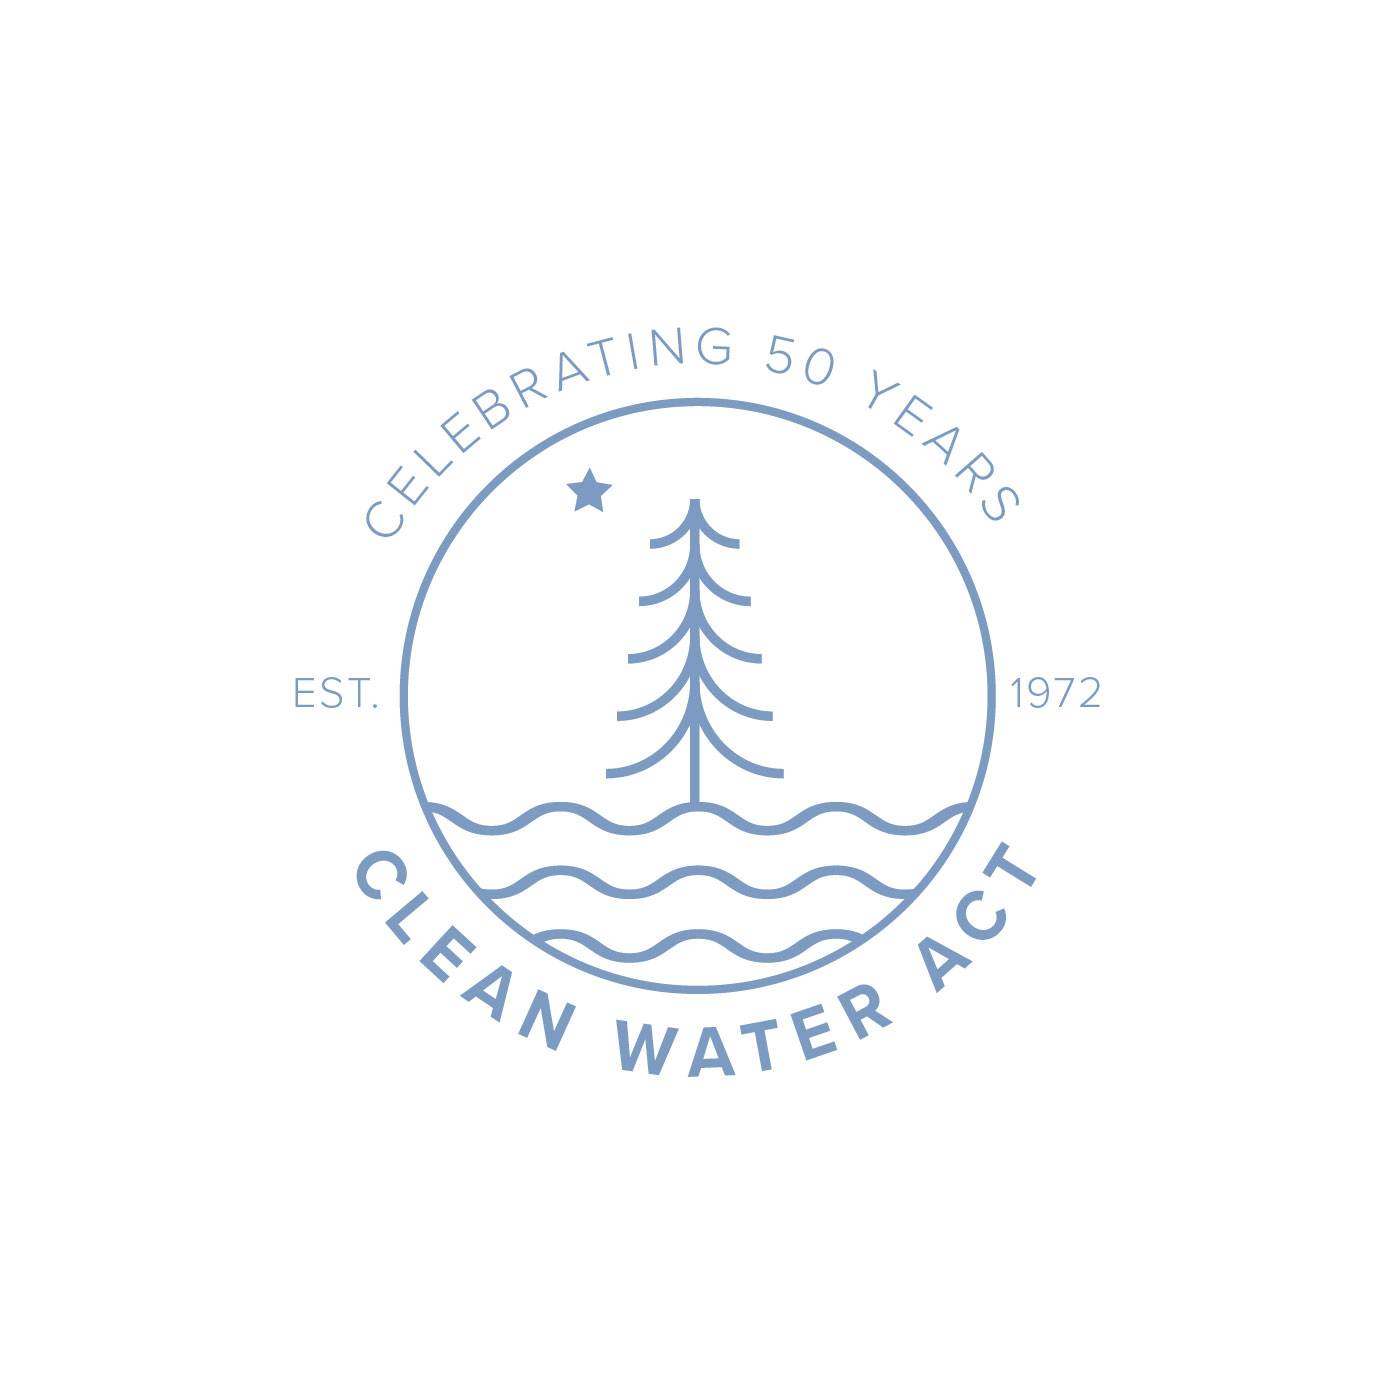 Clean Water Act 50th